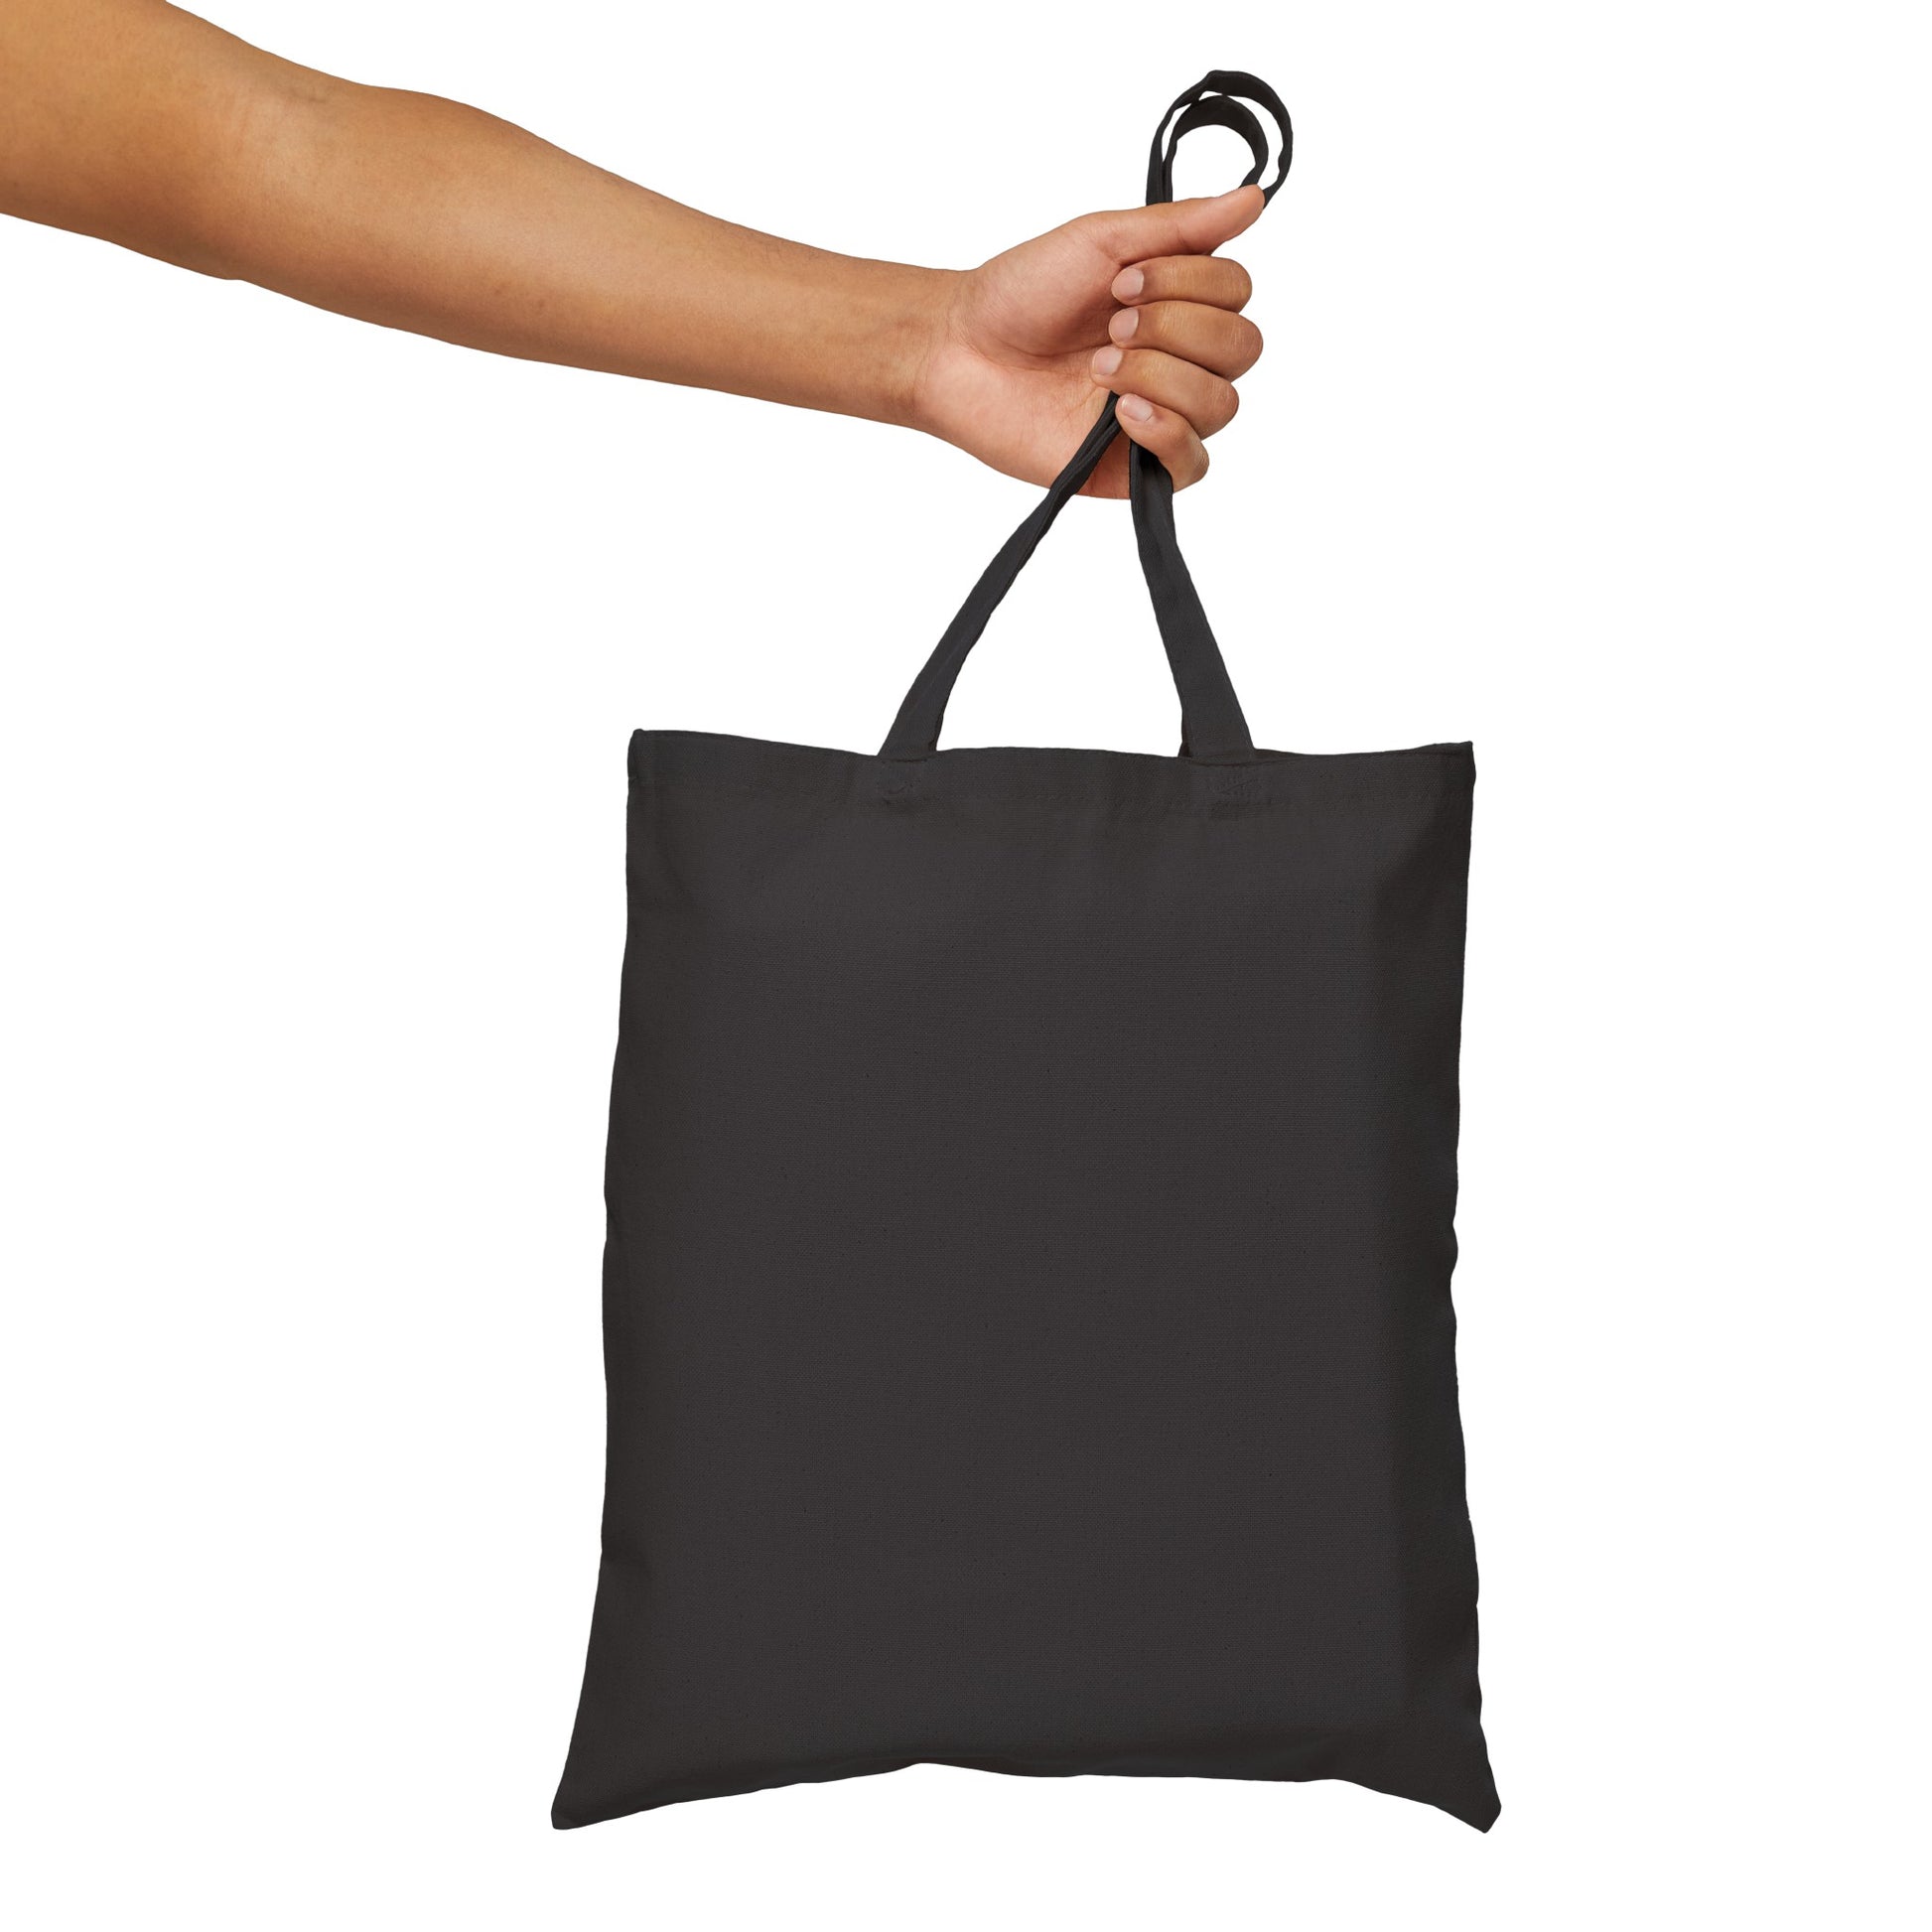 Against a white background, an extended arm holds a Dogs Pure Love tote bag, revealing the back of the bag with no print.